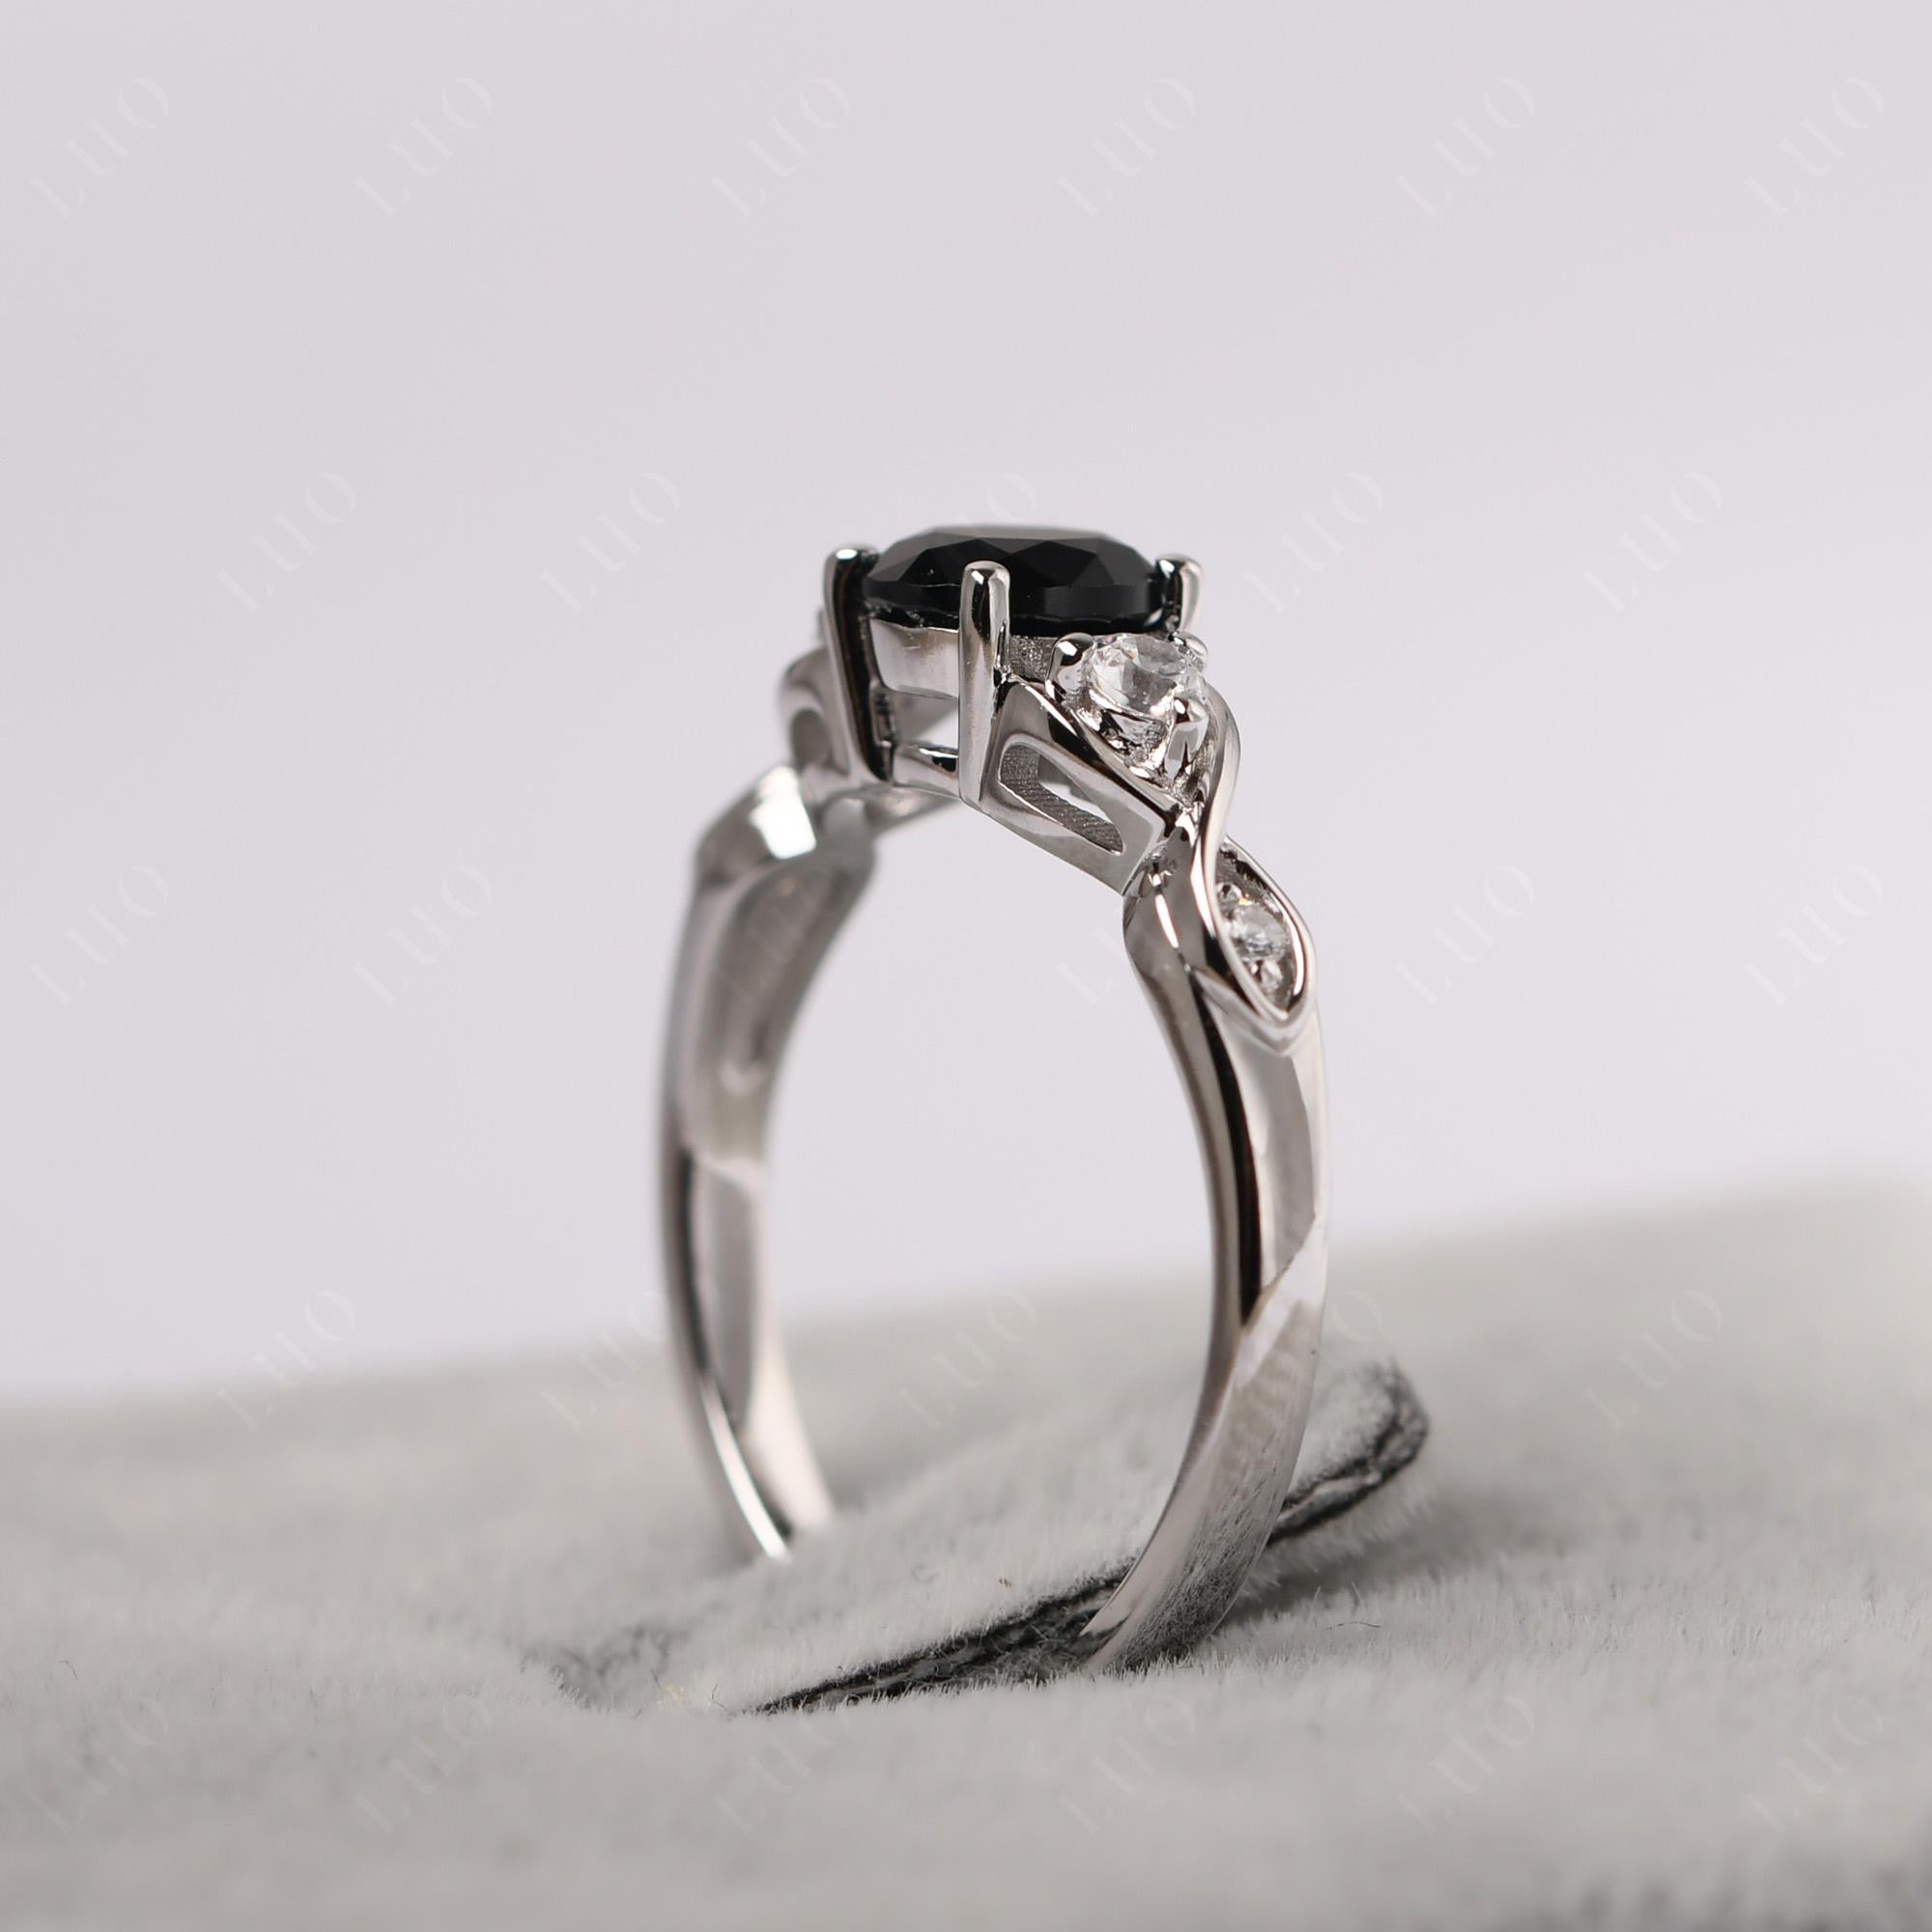 Round Black Spinel Ring Wedding Ring - LUO Jewelry